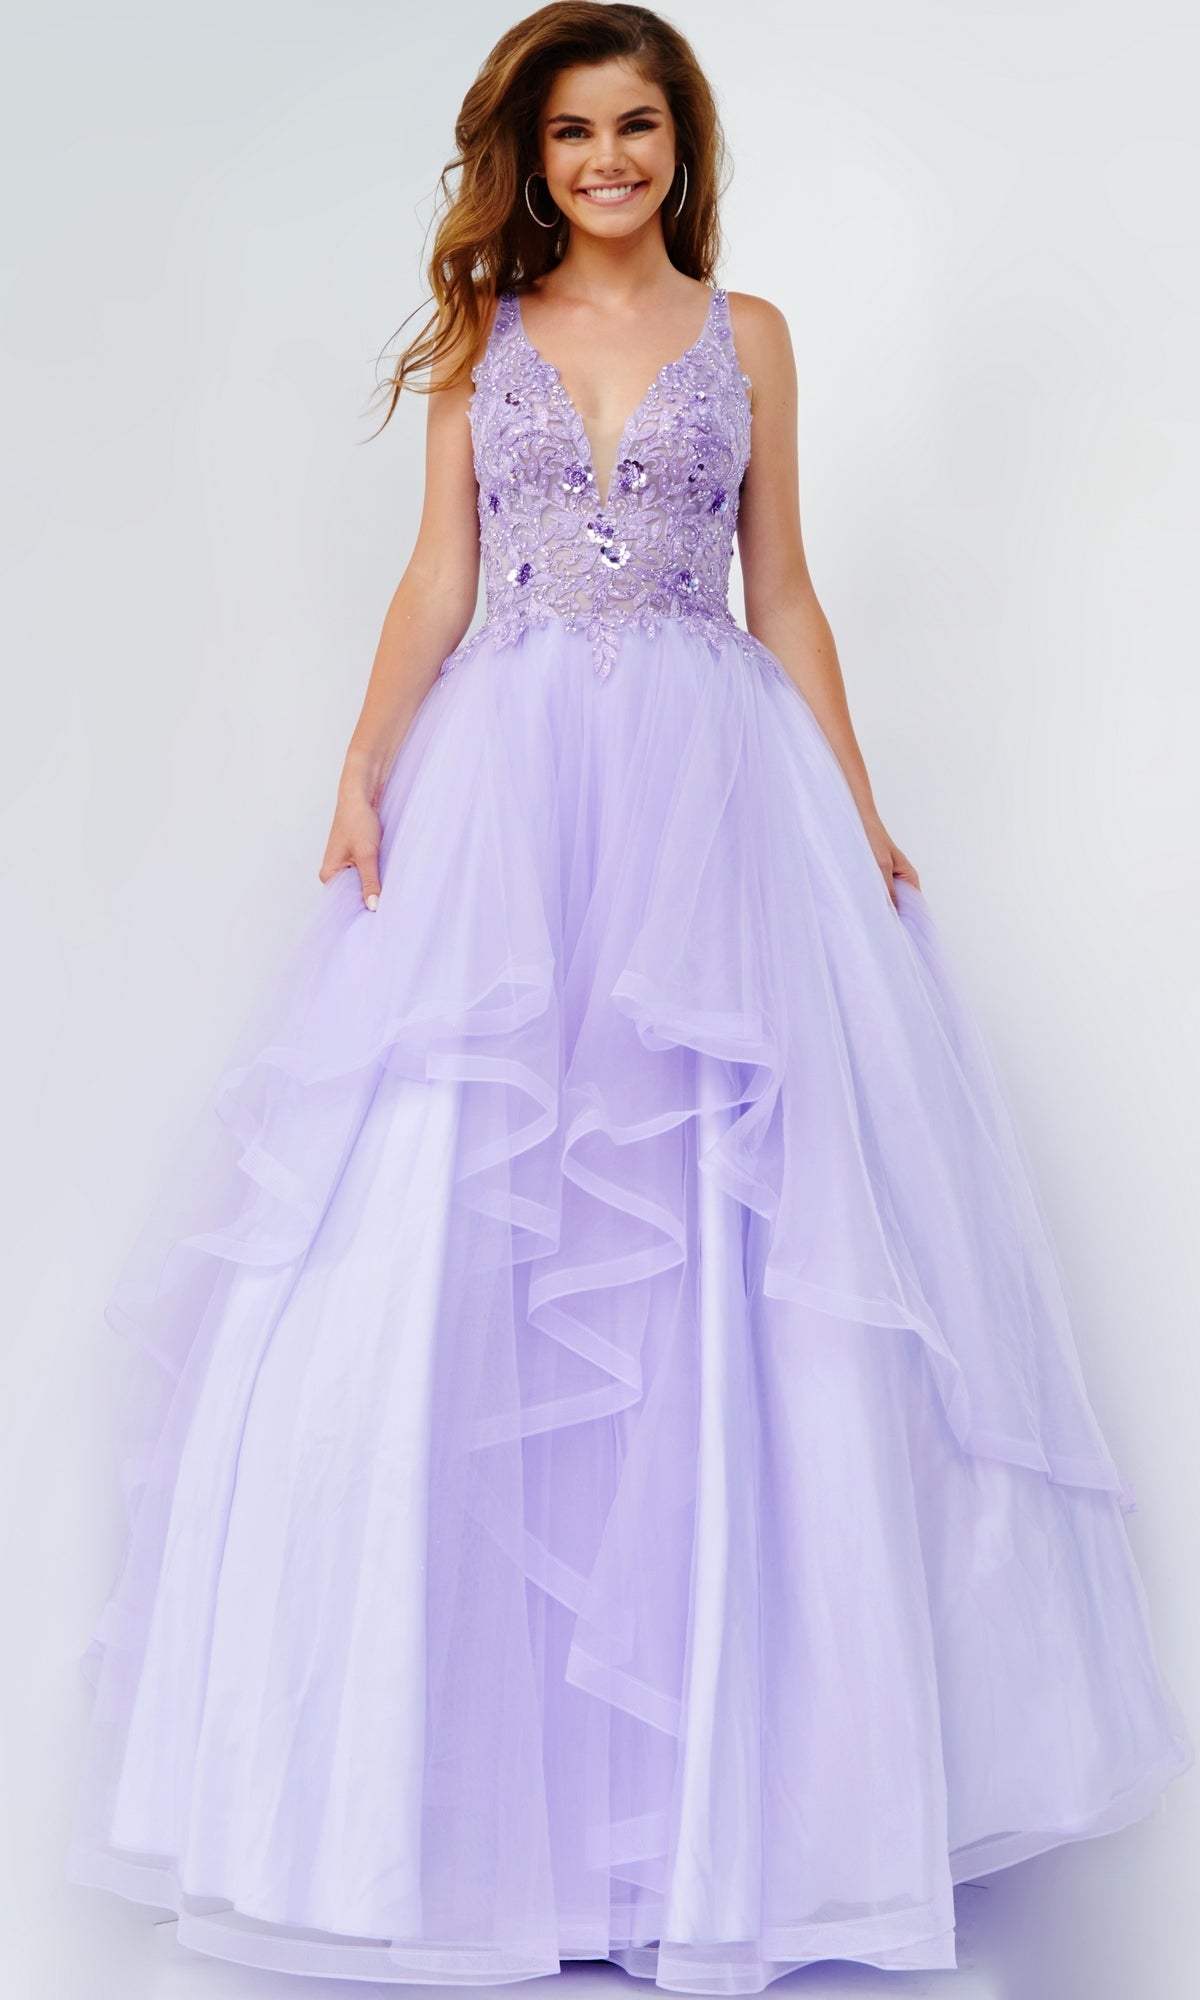 JVN by Jovani Prom Ball Gown with Layered Skirt